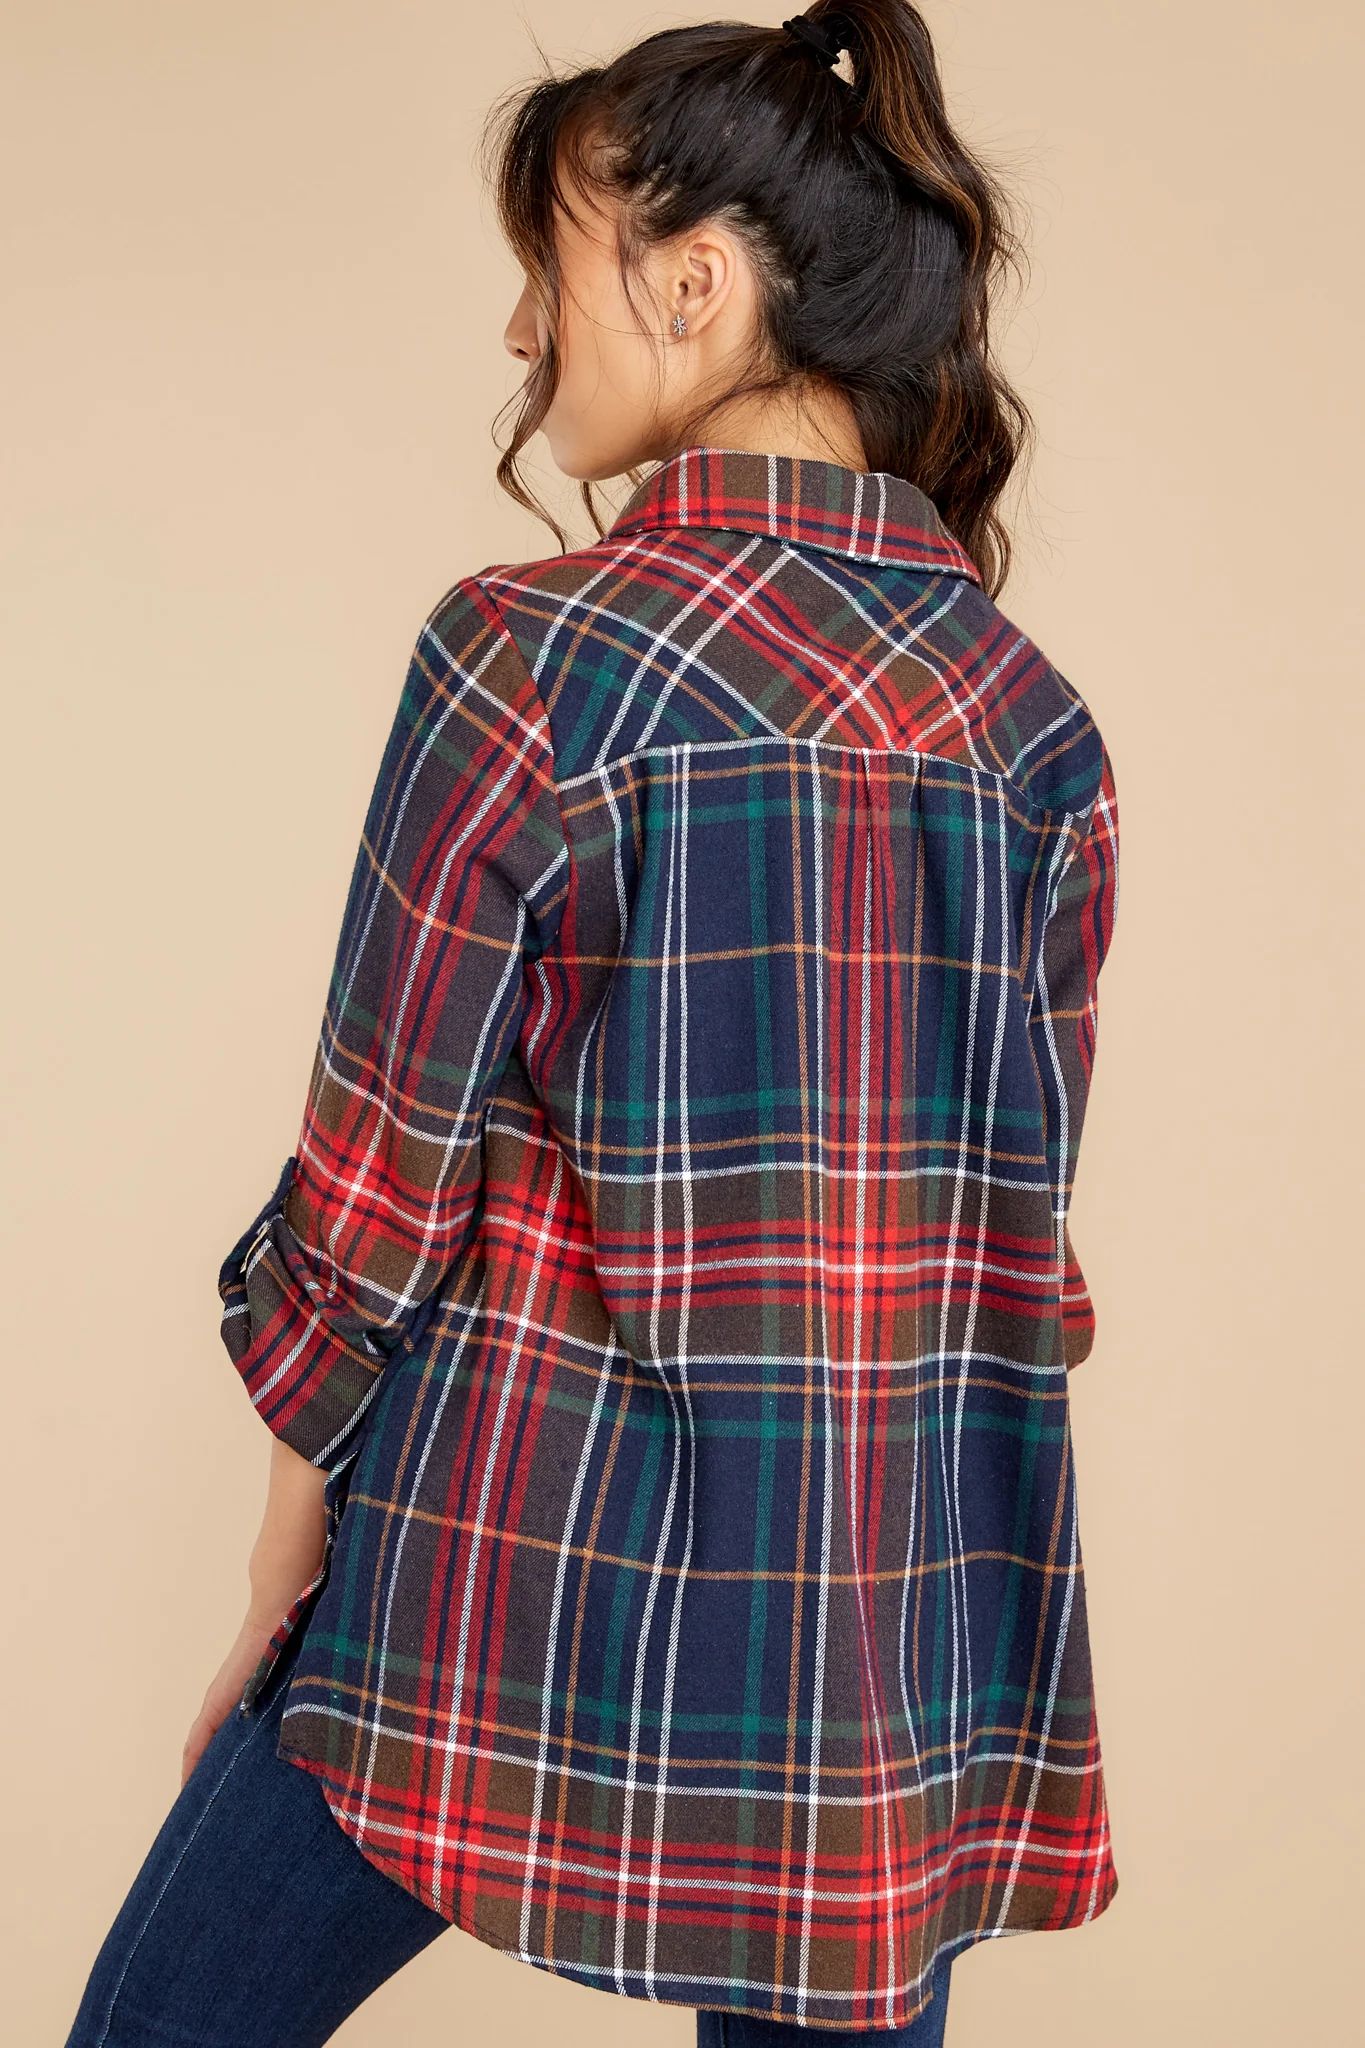 Just Like Home Navy Multi Plaid Top | Red Dress 